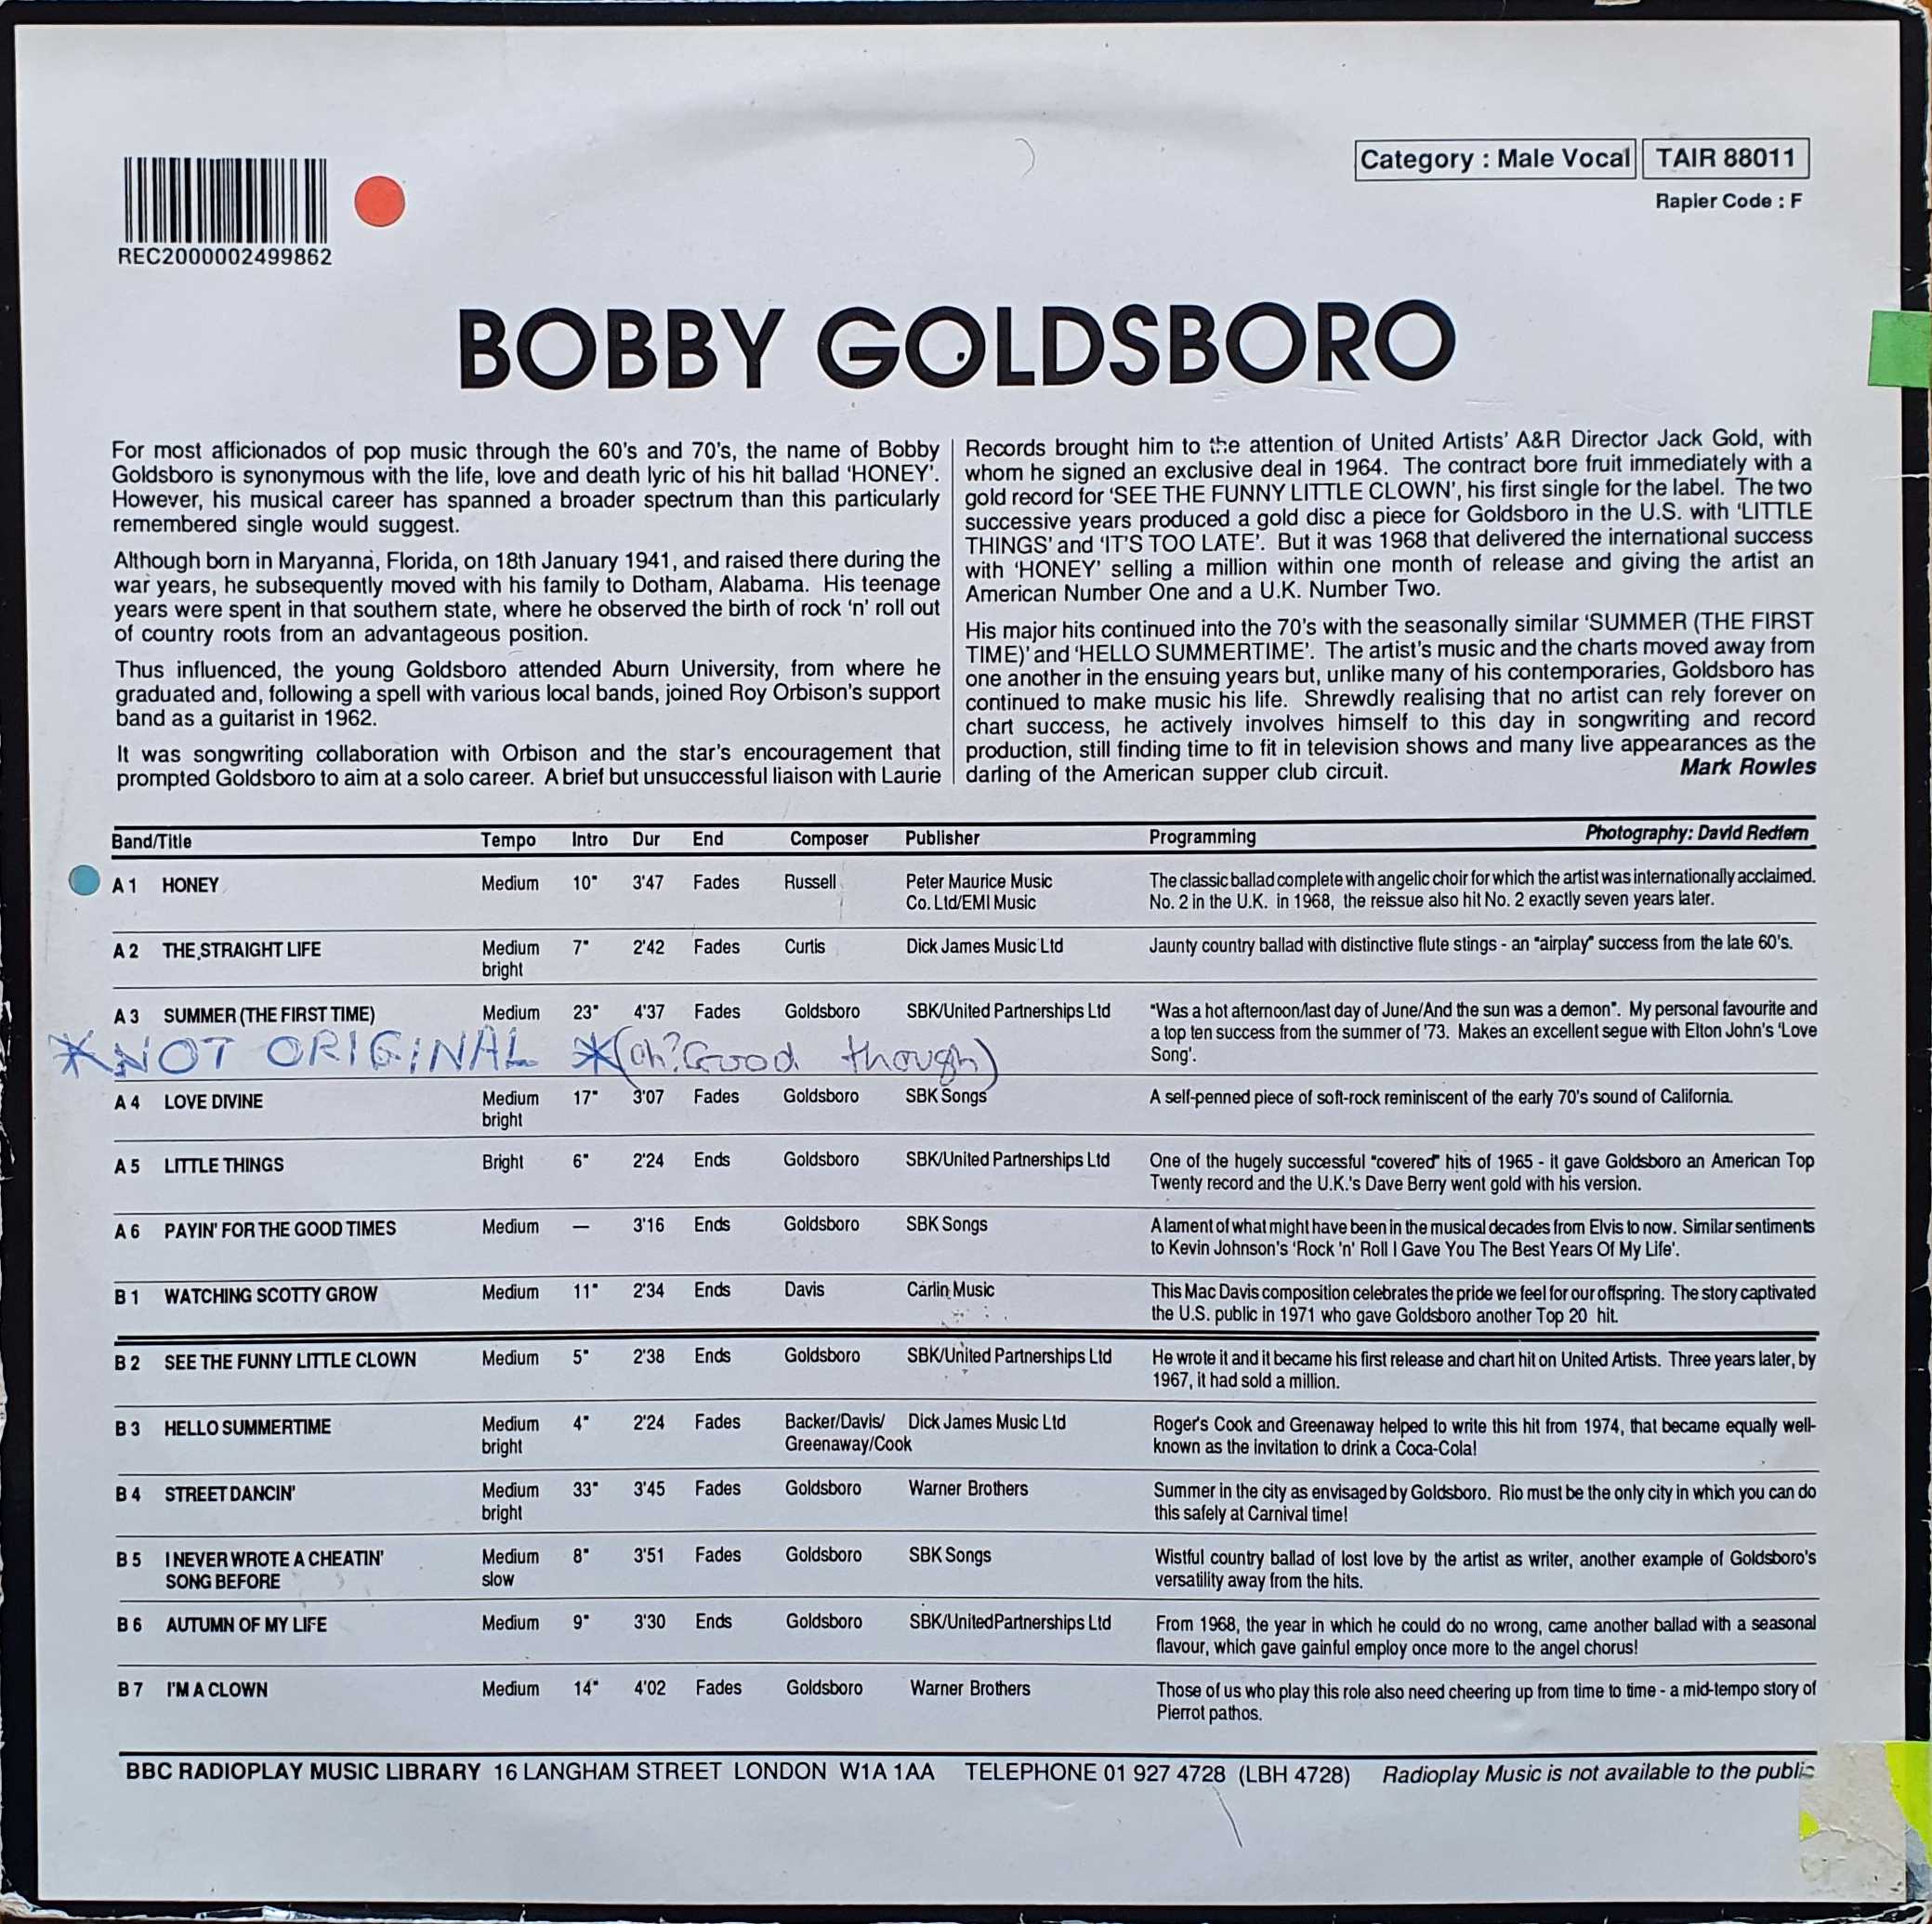 Picture of TAIR 88011 Bobby Goldsboro by artist Bobby Goldsboro from the BBC records and Tapes library